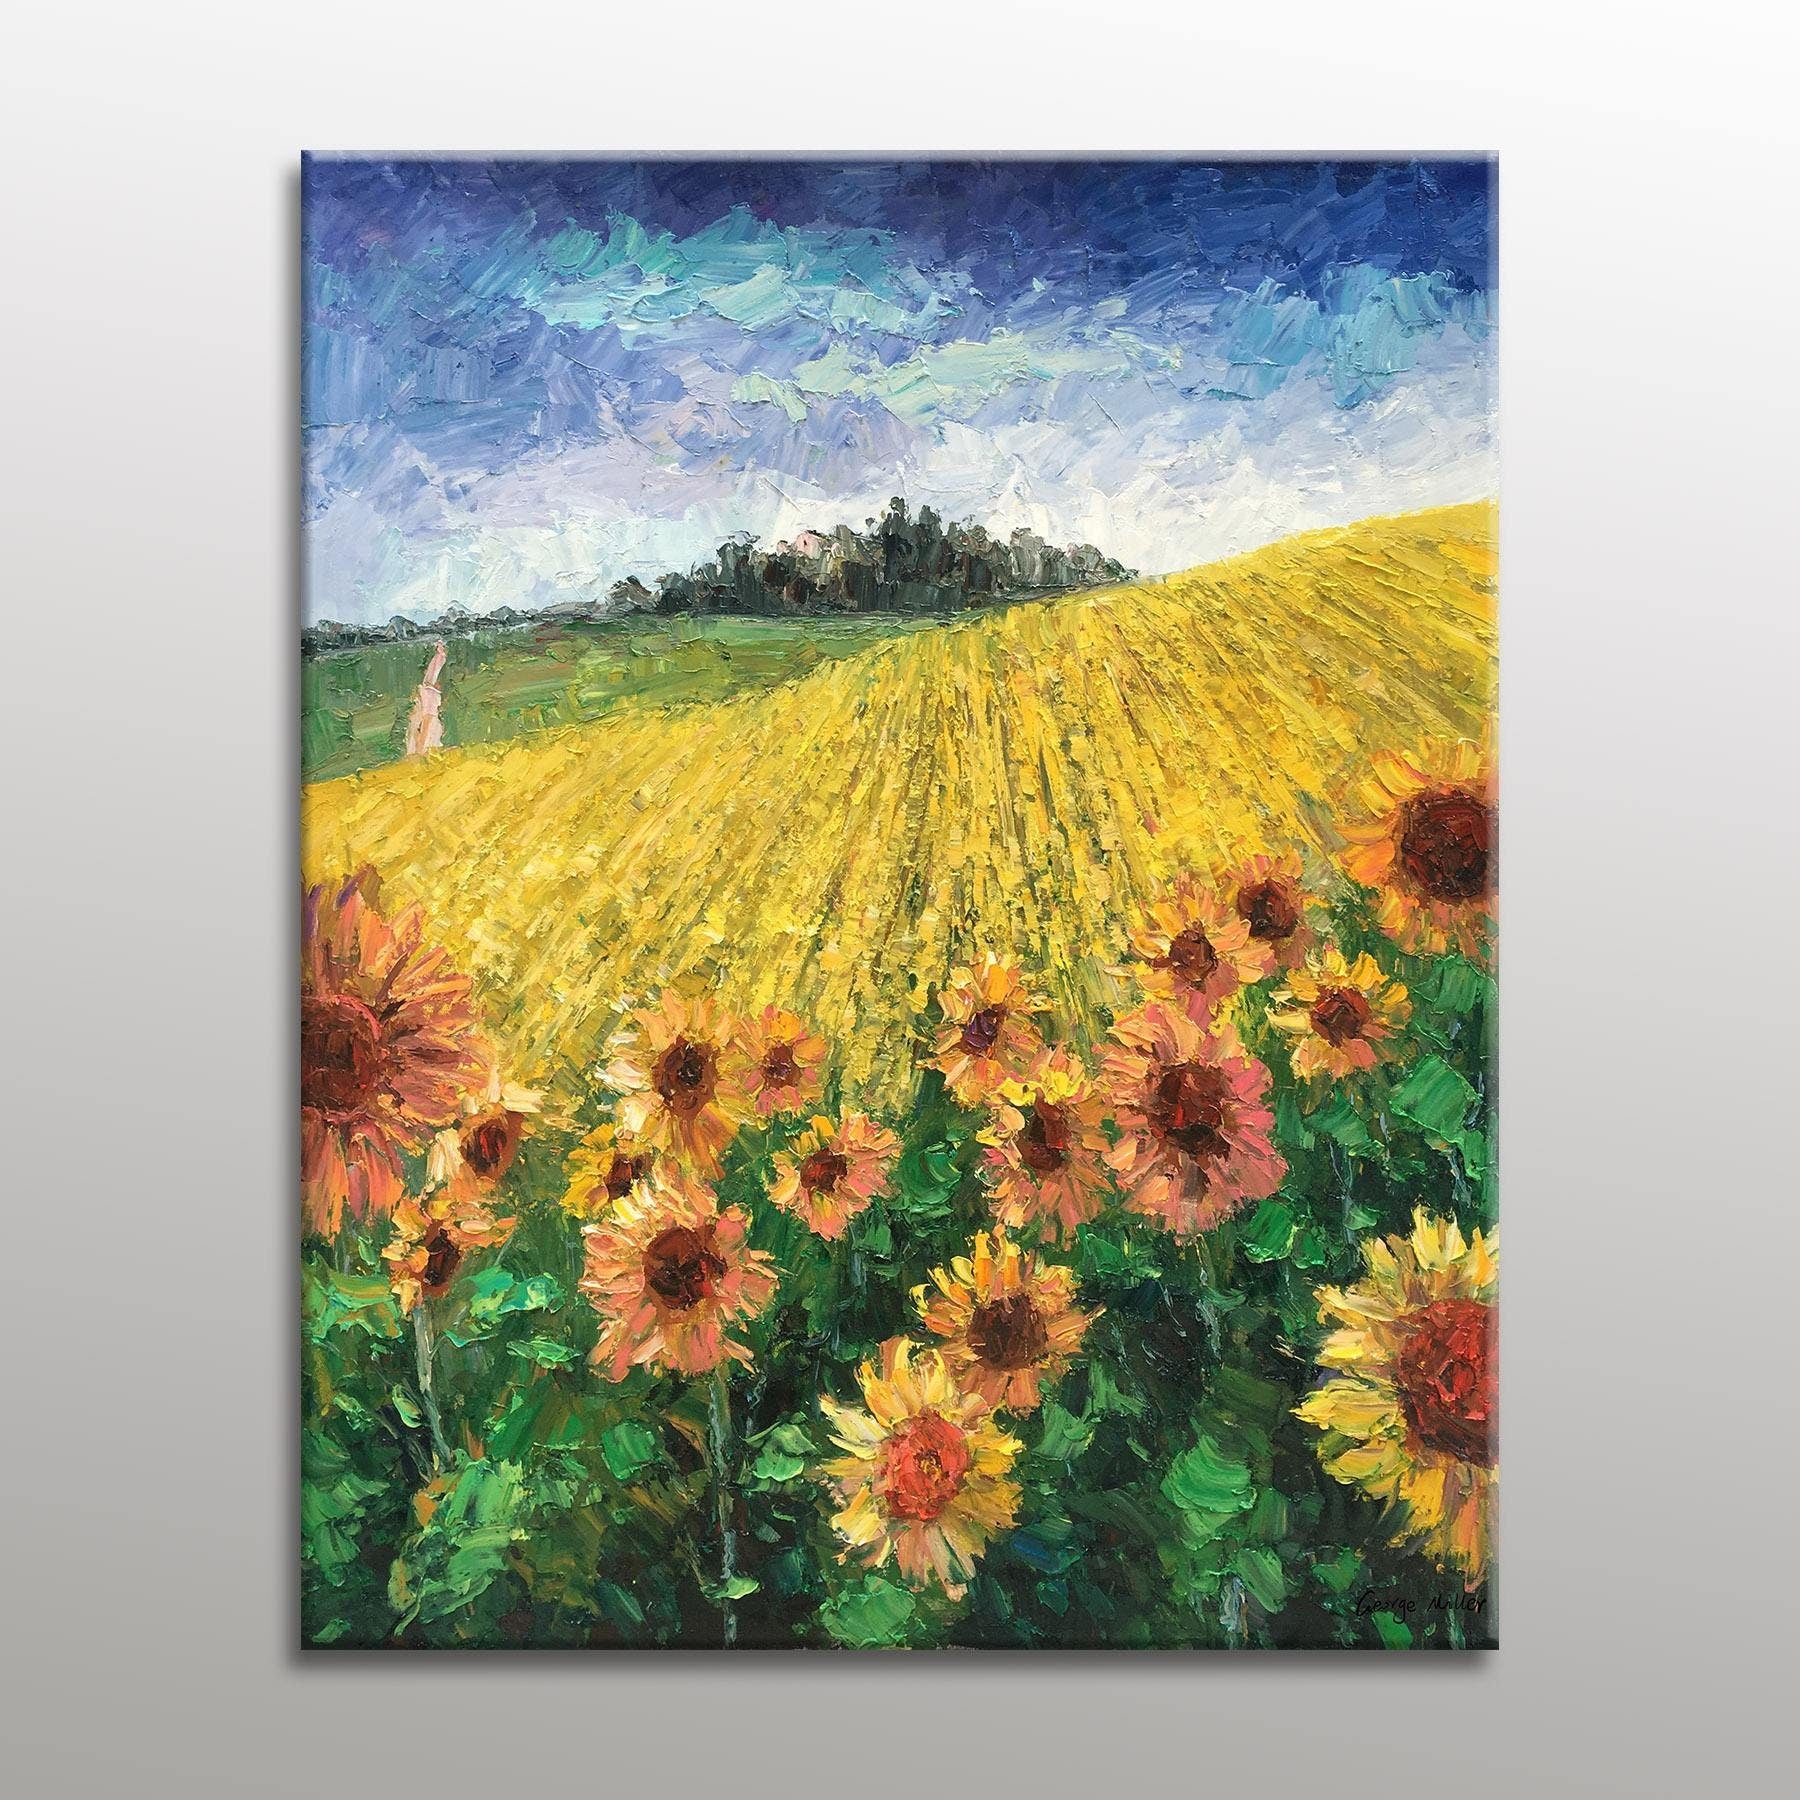 Oil Painting Tuscany Sunflower Fields: Large Original Canvas Art | Ready to  Hang | 32x40 inches - Stretched Canvas, Ready To Ship